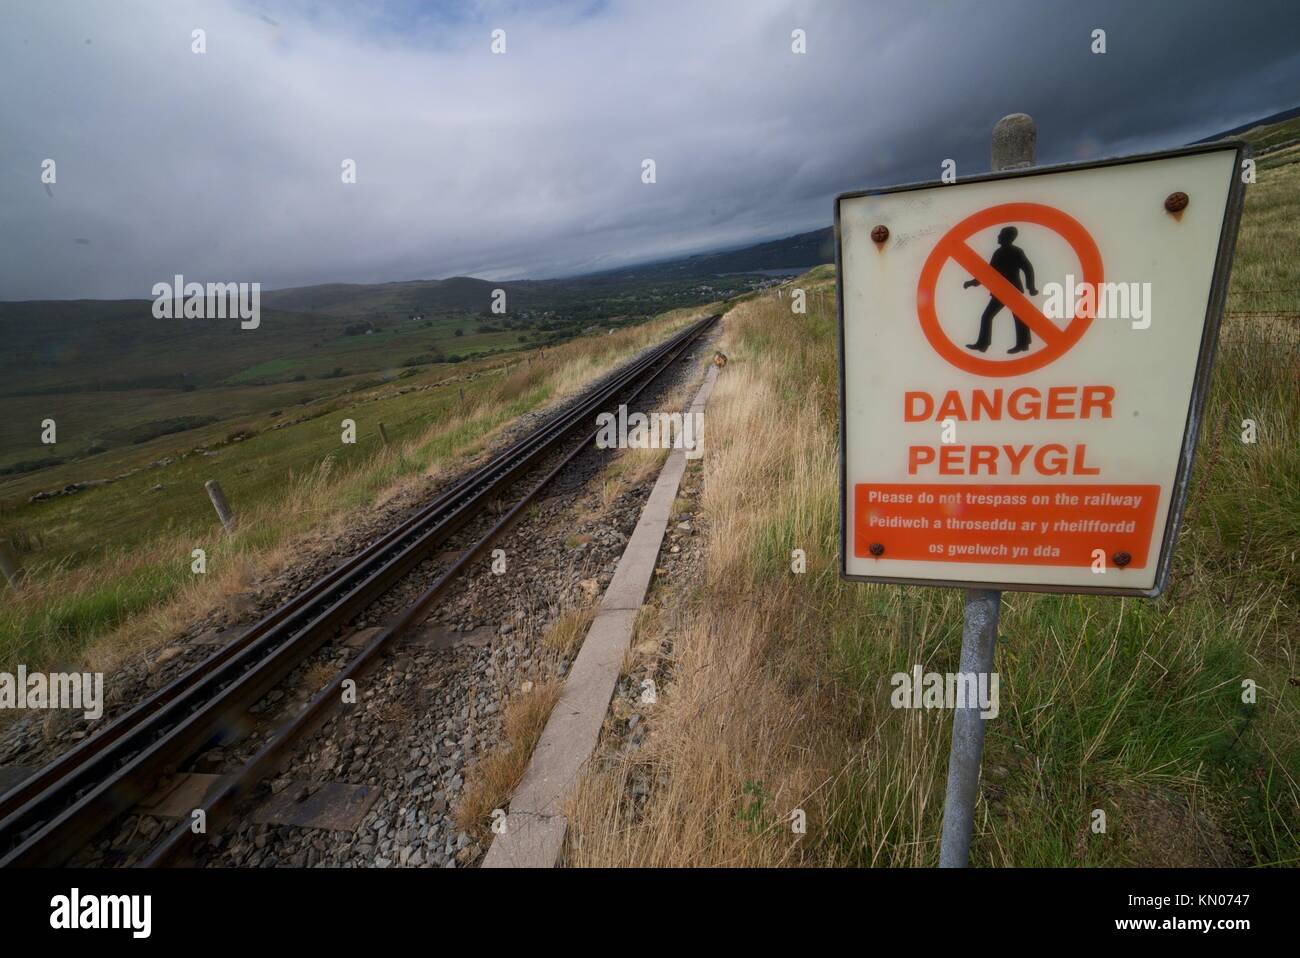 Railway track along Snowdon Mountain in Snowdonia National Park, Wales. Danger sign along railway. track. Danger peryol. Stock Photo